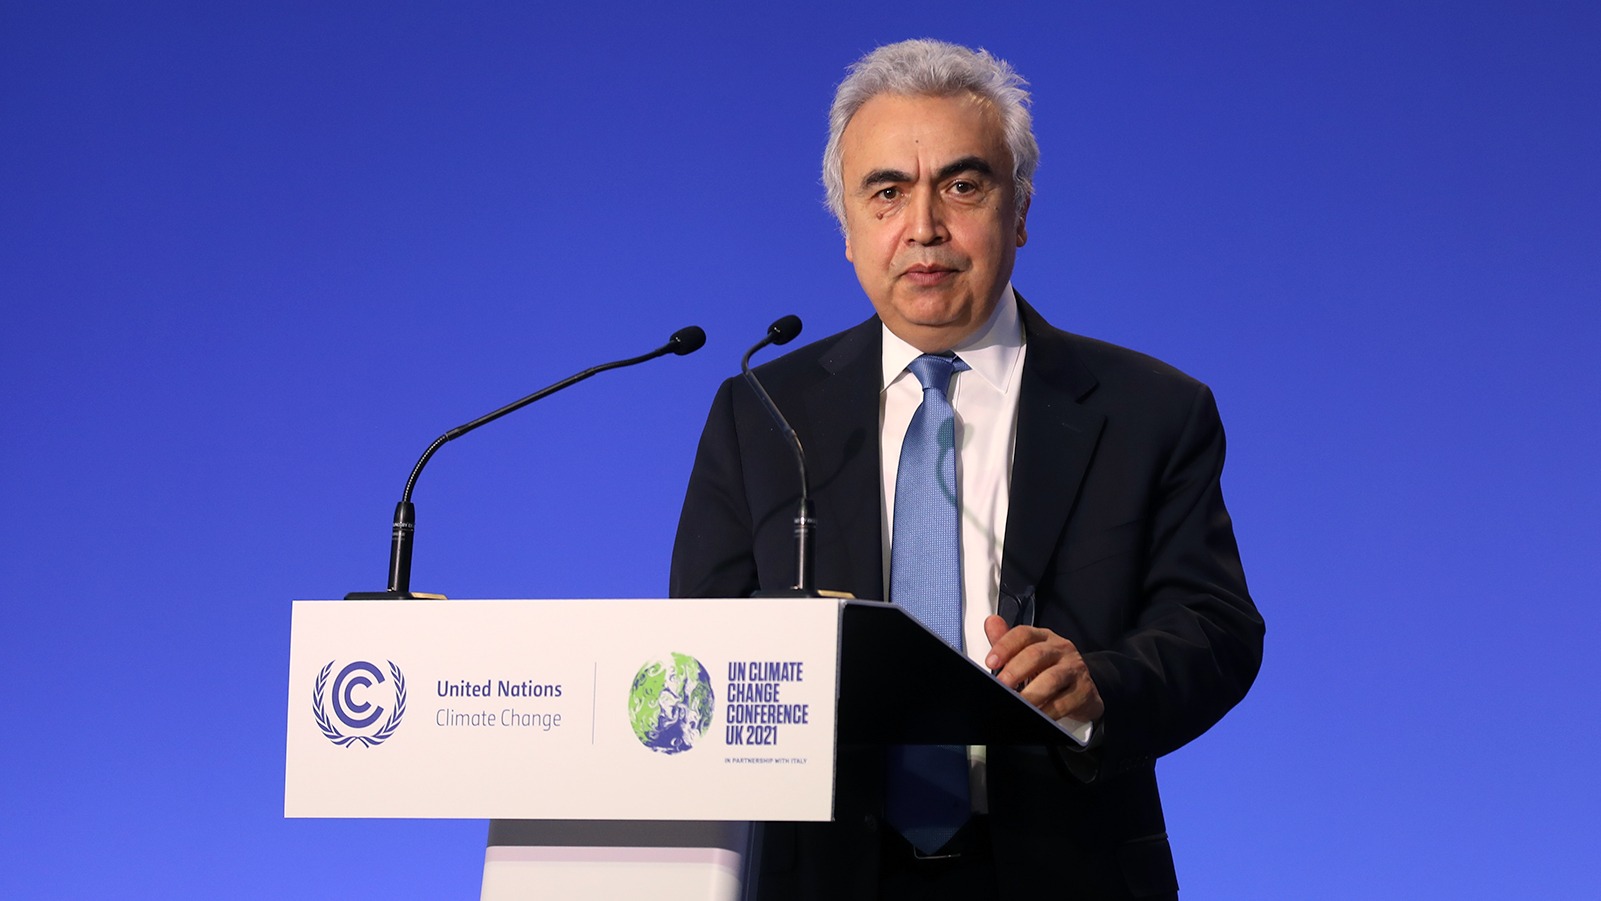 International Energy Agency executive director Fatih Birol at COP26 in Glasgow. Photo by IISD/ENB.